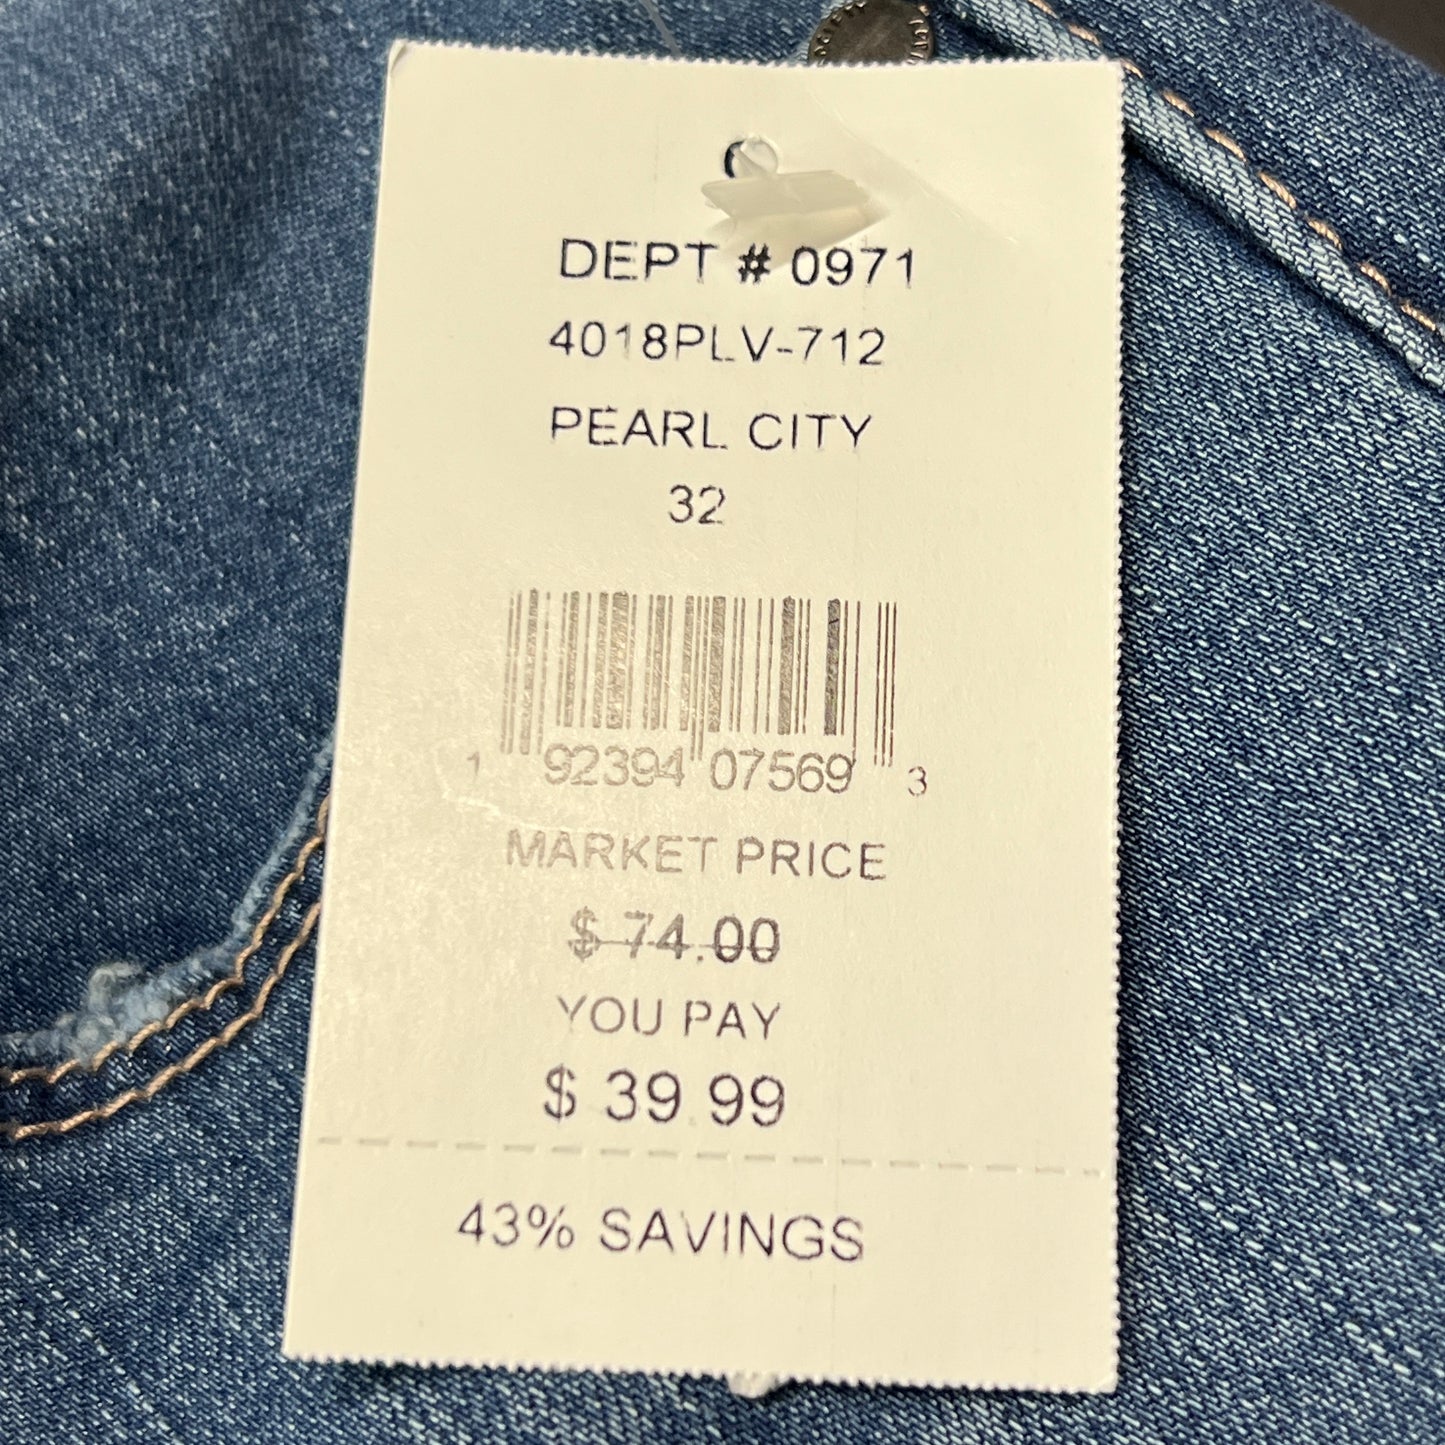 ARTICLES OF SOCIETY Pearl City Denim Jeans Women's Sz 32 Blue 4018PLV-712 (New)